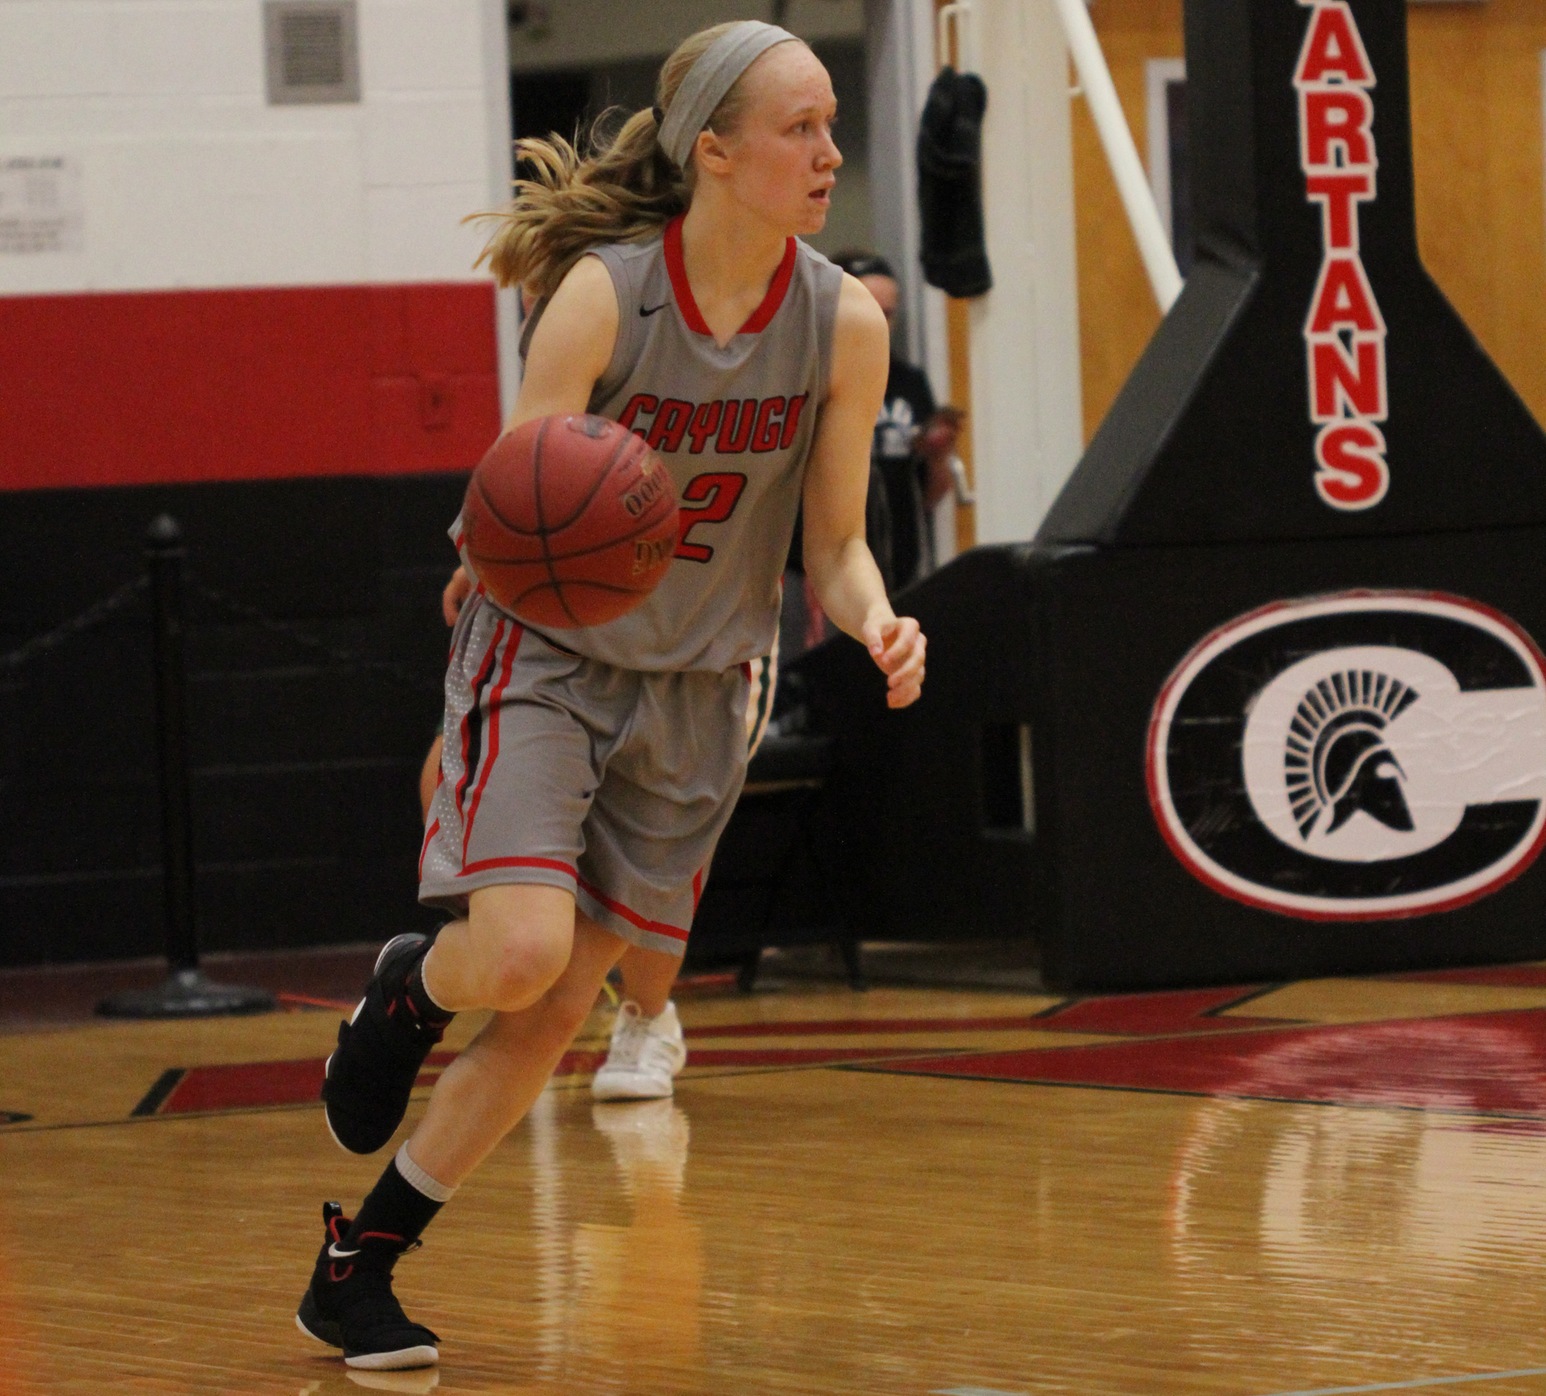 Erica Helzer led the Spartans with 20 points in their 60-55 win over the Herkimer Generals.